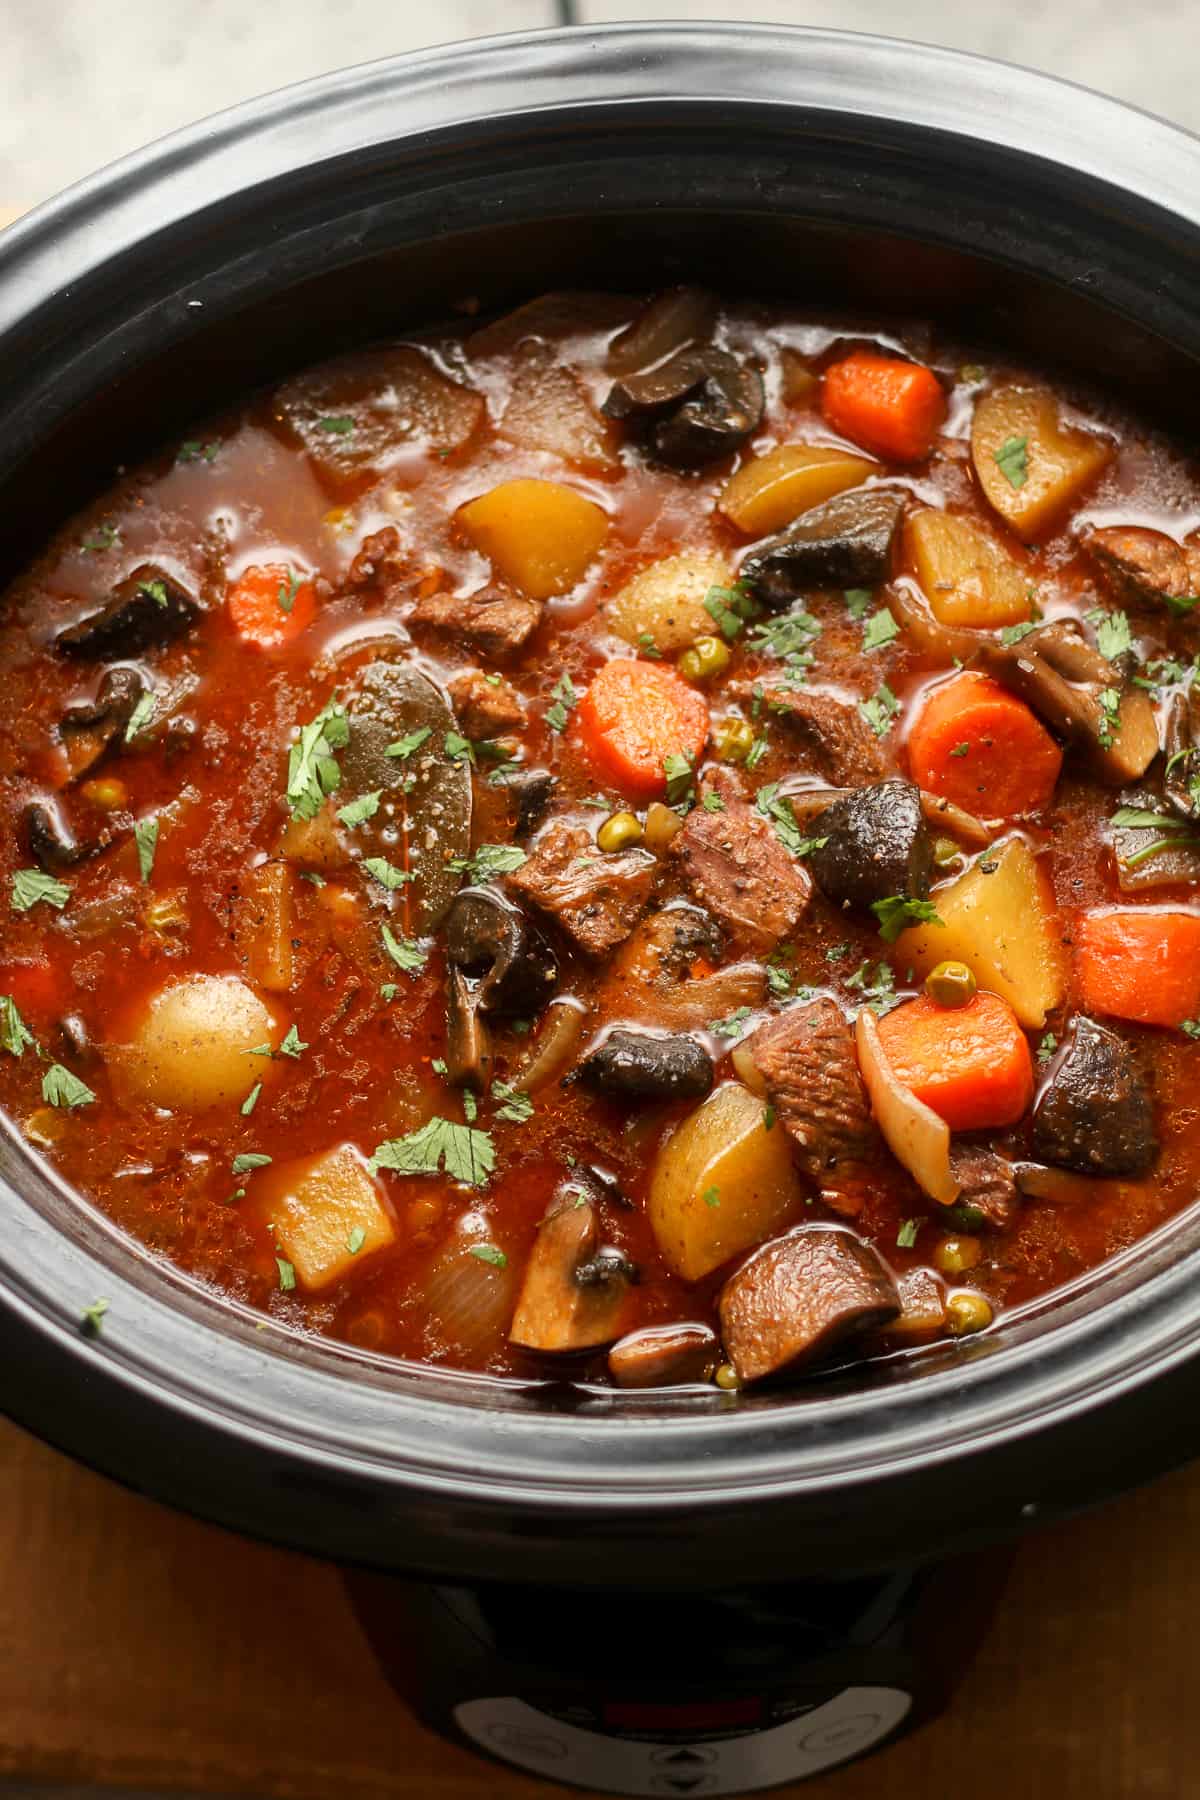 A slow cooker full of beef stew.